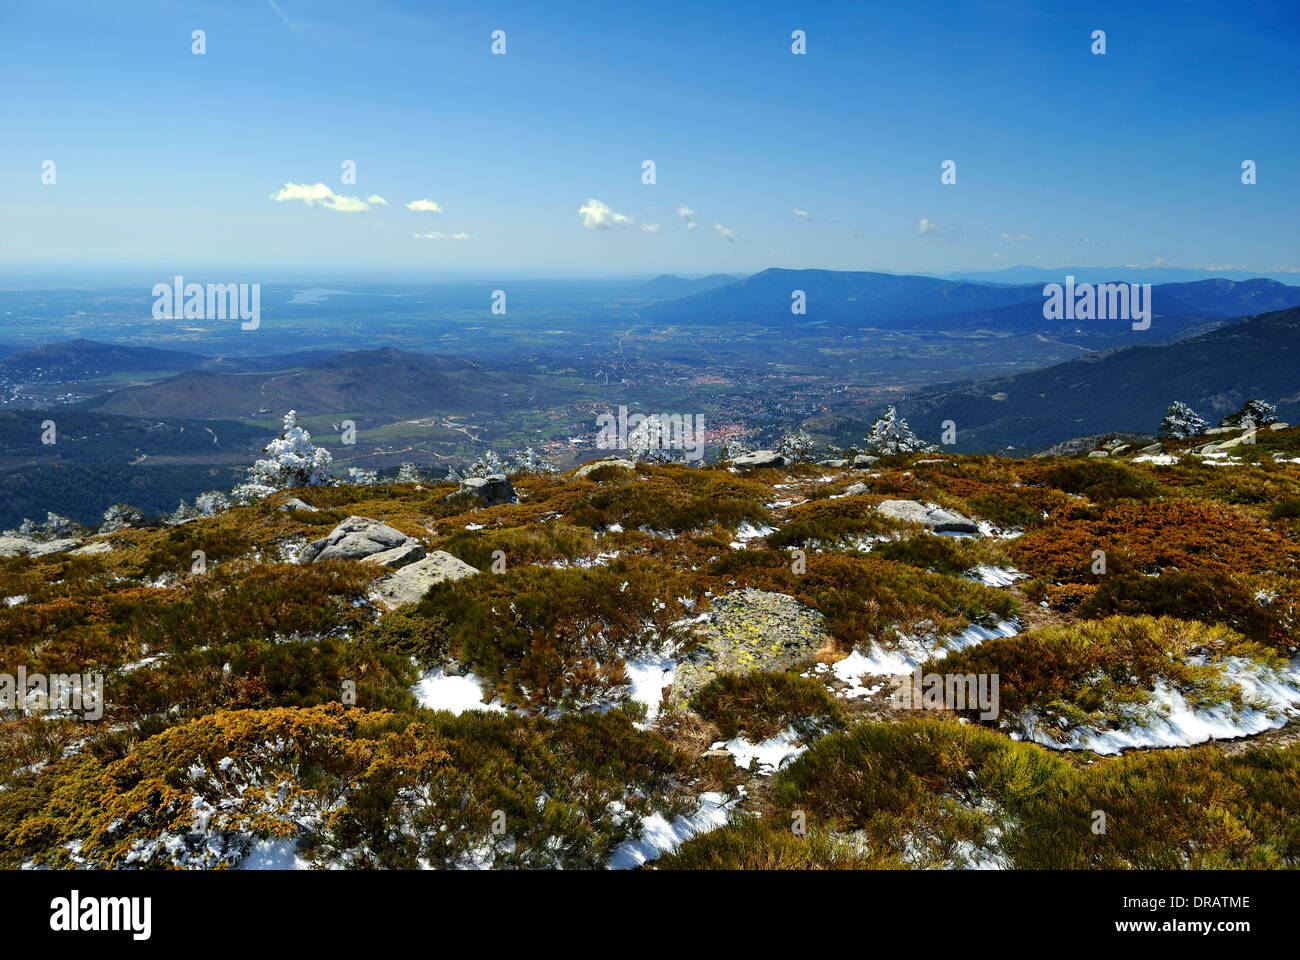 Panoramic view from Siete Picos. Seven Peaks is one of the most important and unique in the Sierra de Guadarrama massifs. Stock Photo